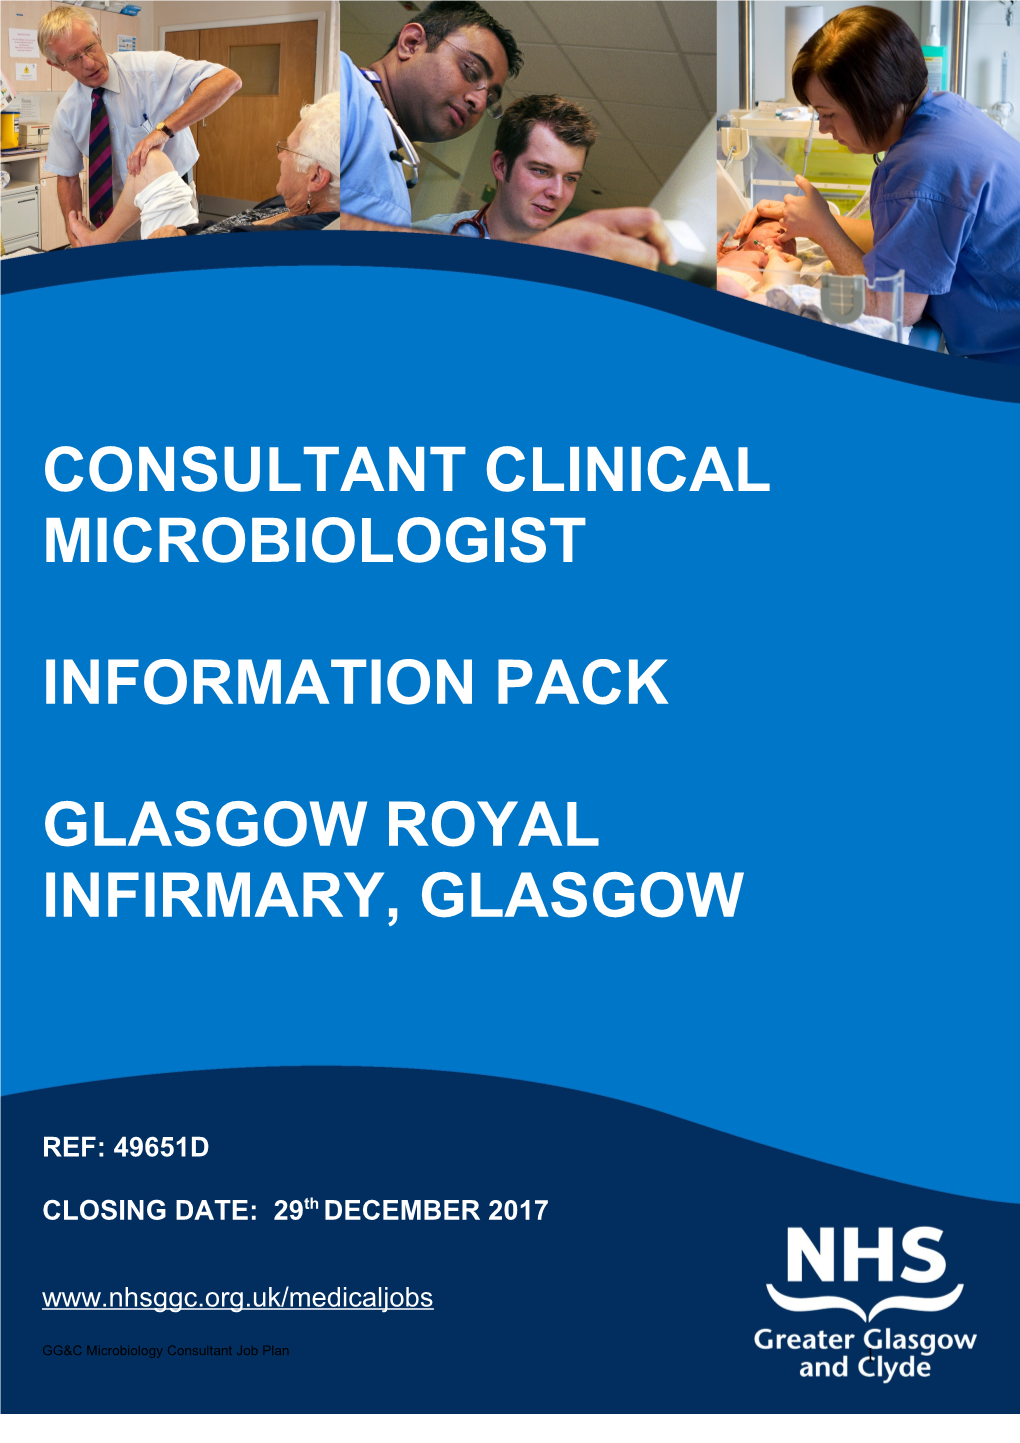 Consultant Clinical Microbiologist